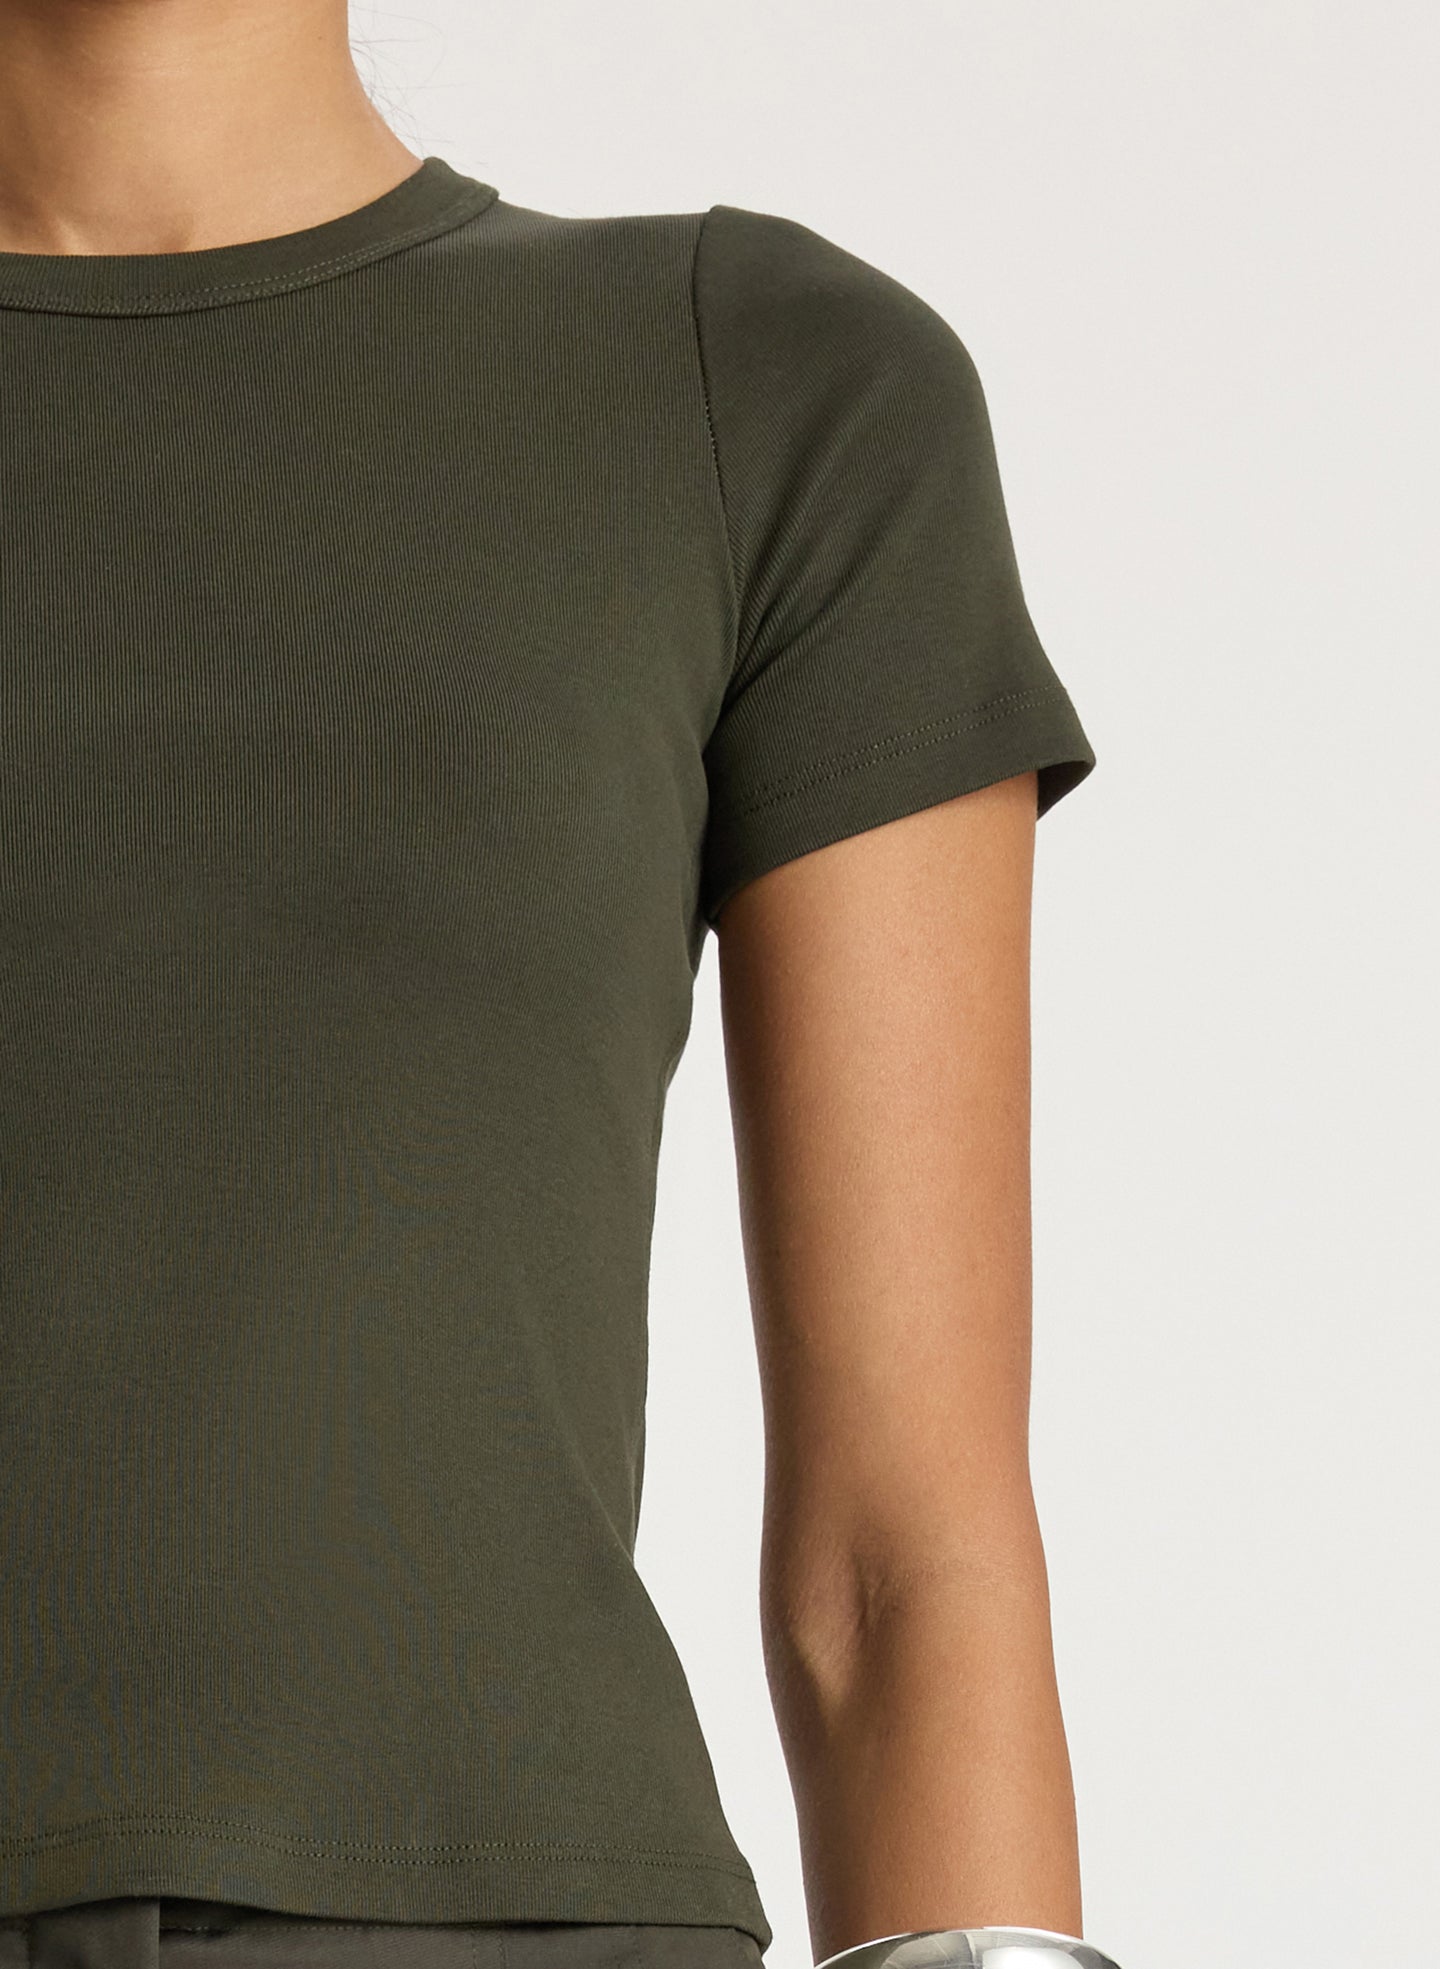 detail  view of woman wearing olive green tshirt and olive green wide leg pants